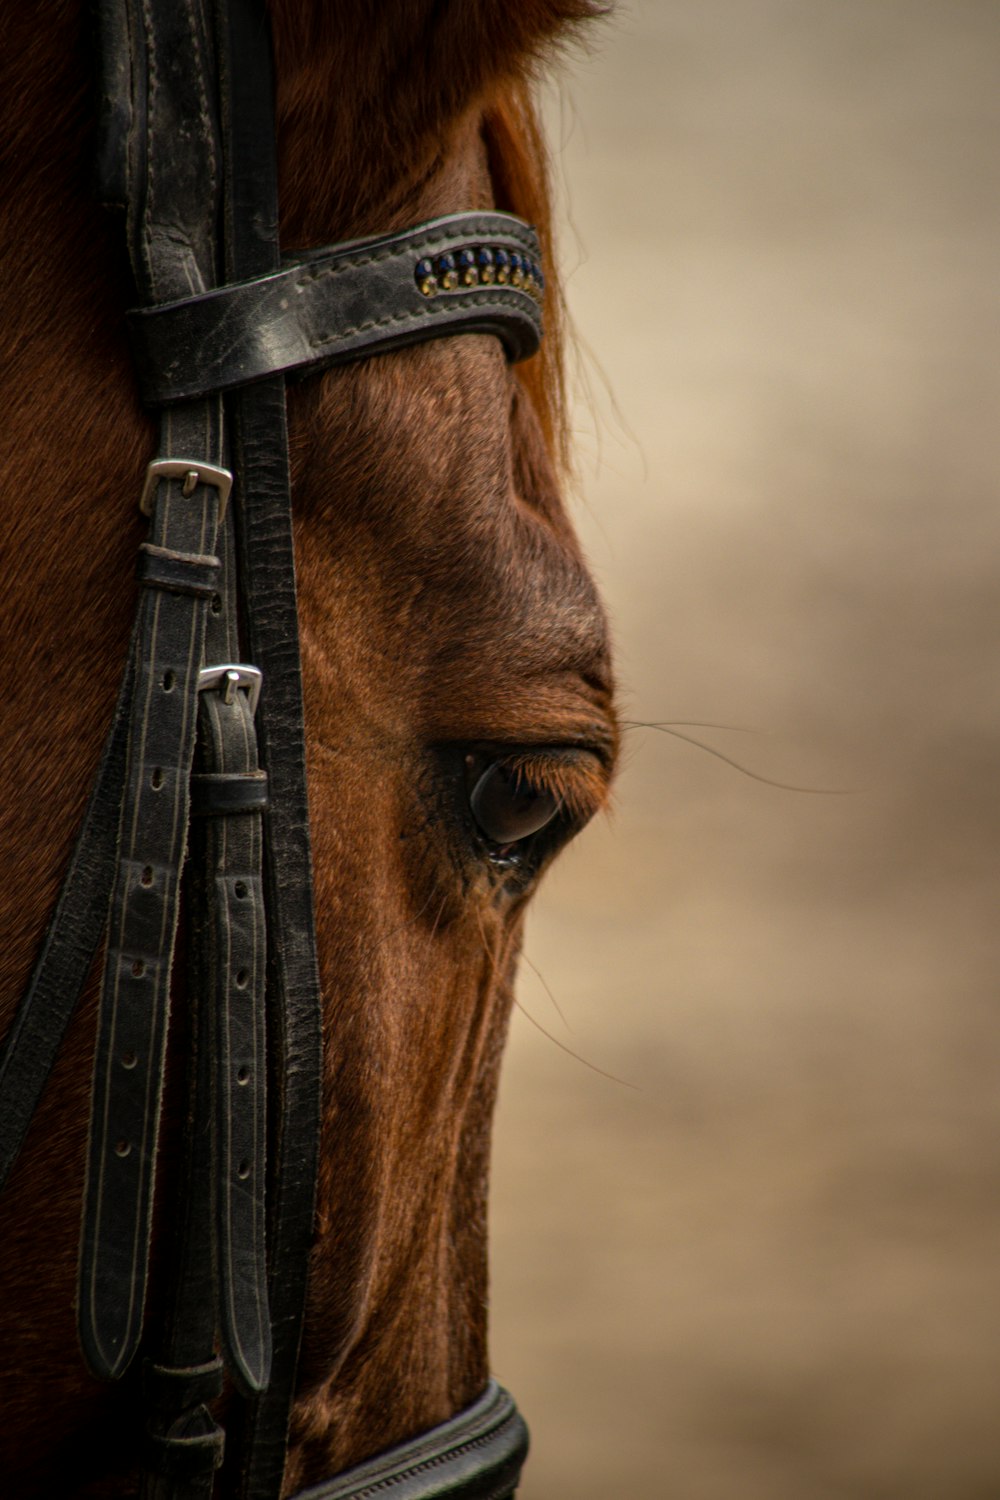 a close up of a horse's face and bridle